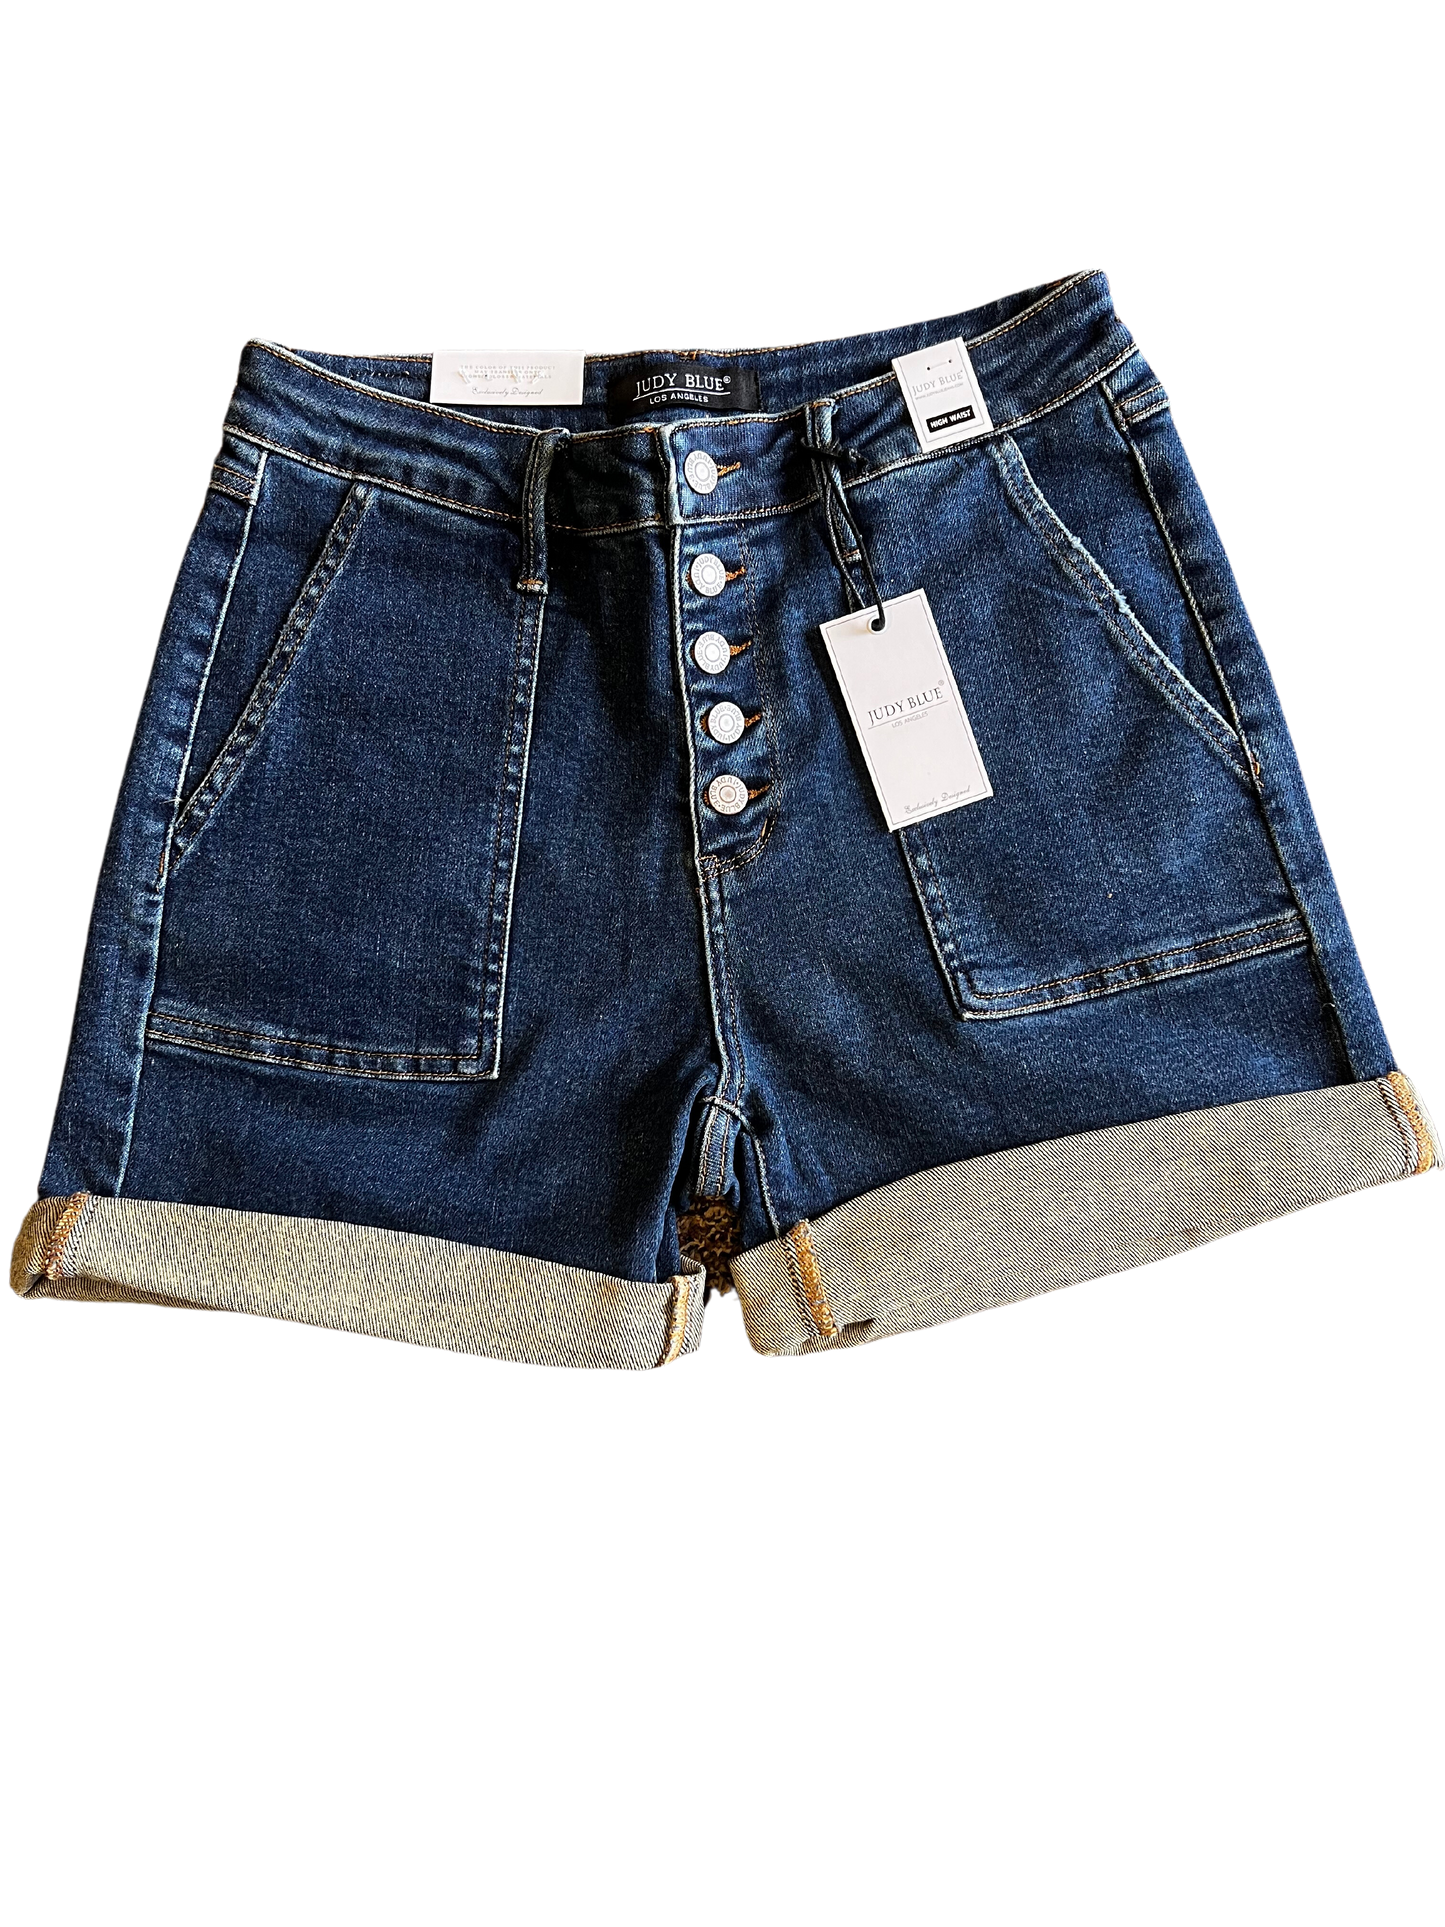 Button fly- Judy Blue shorts